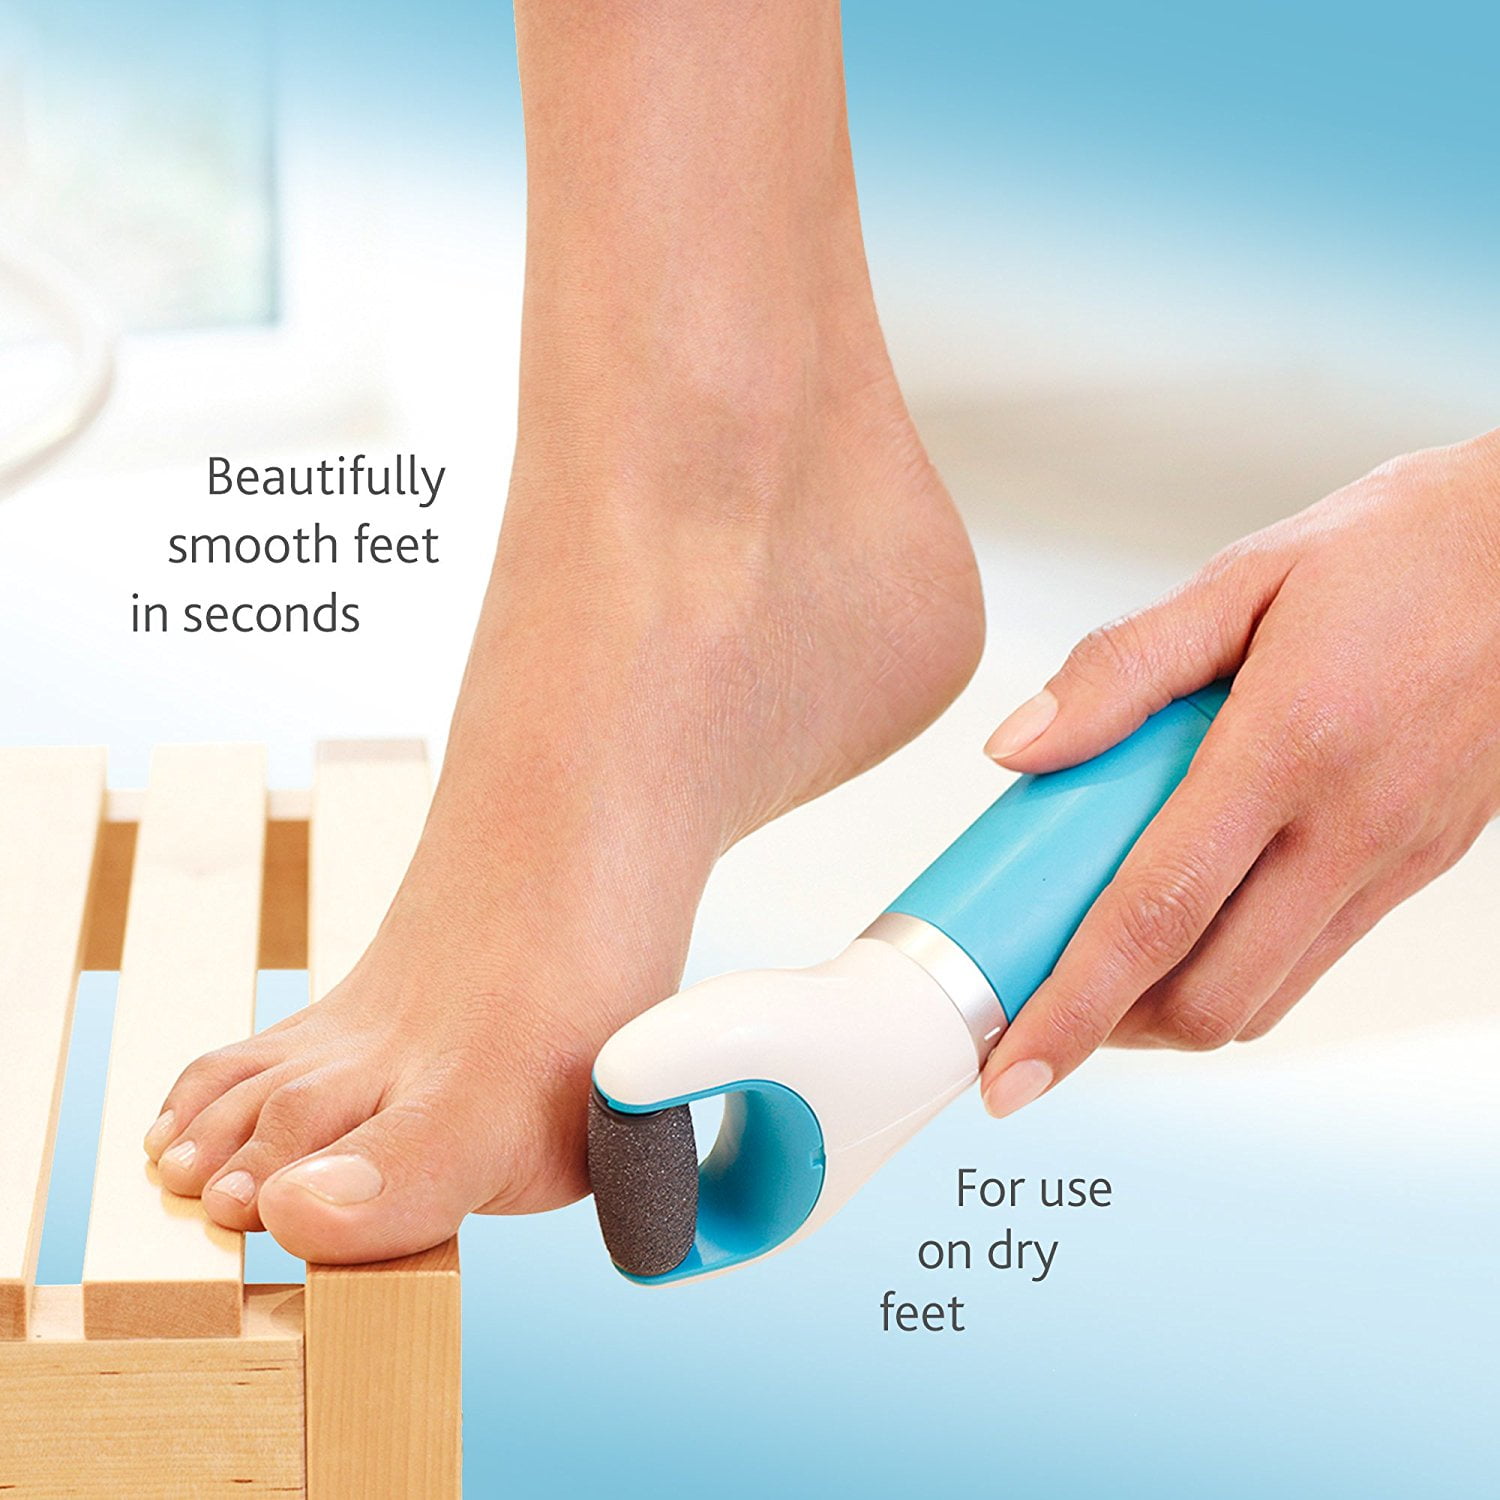 Amope Pedi Perfect Electronic Foot File With Diamond Crystals 